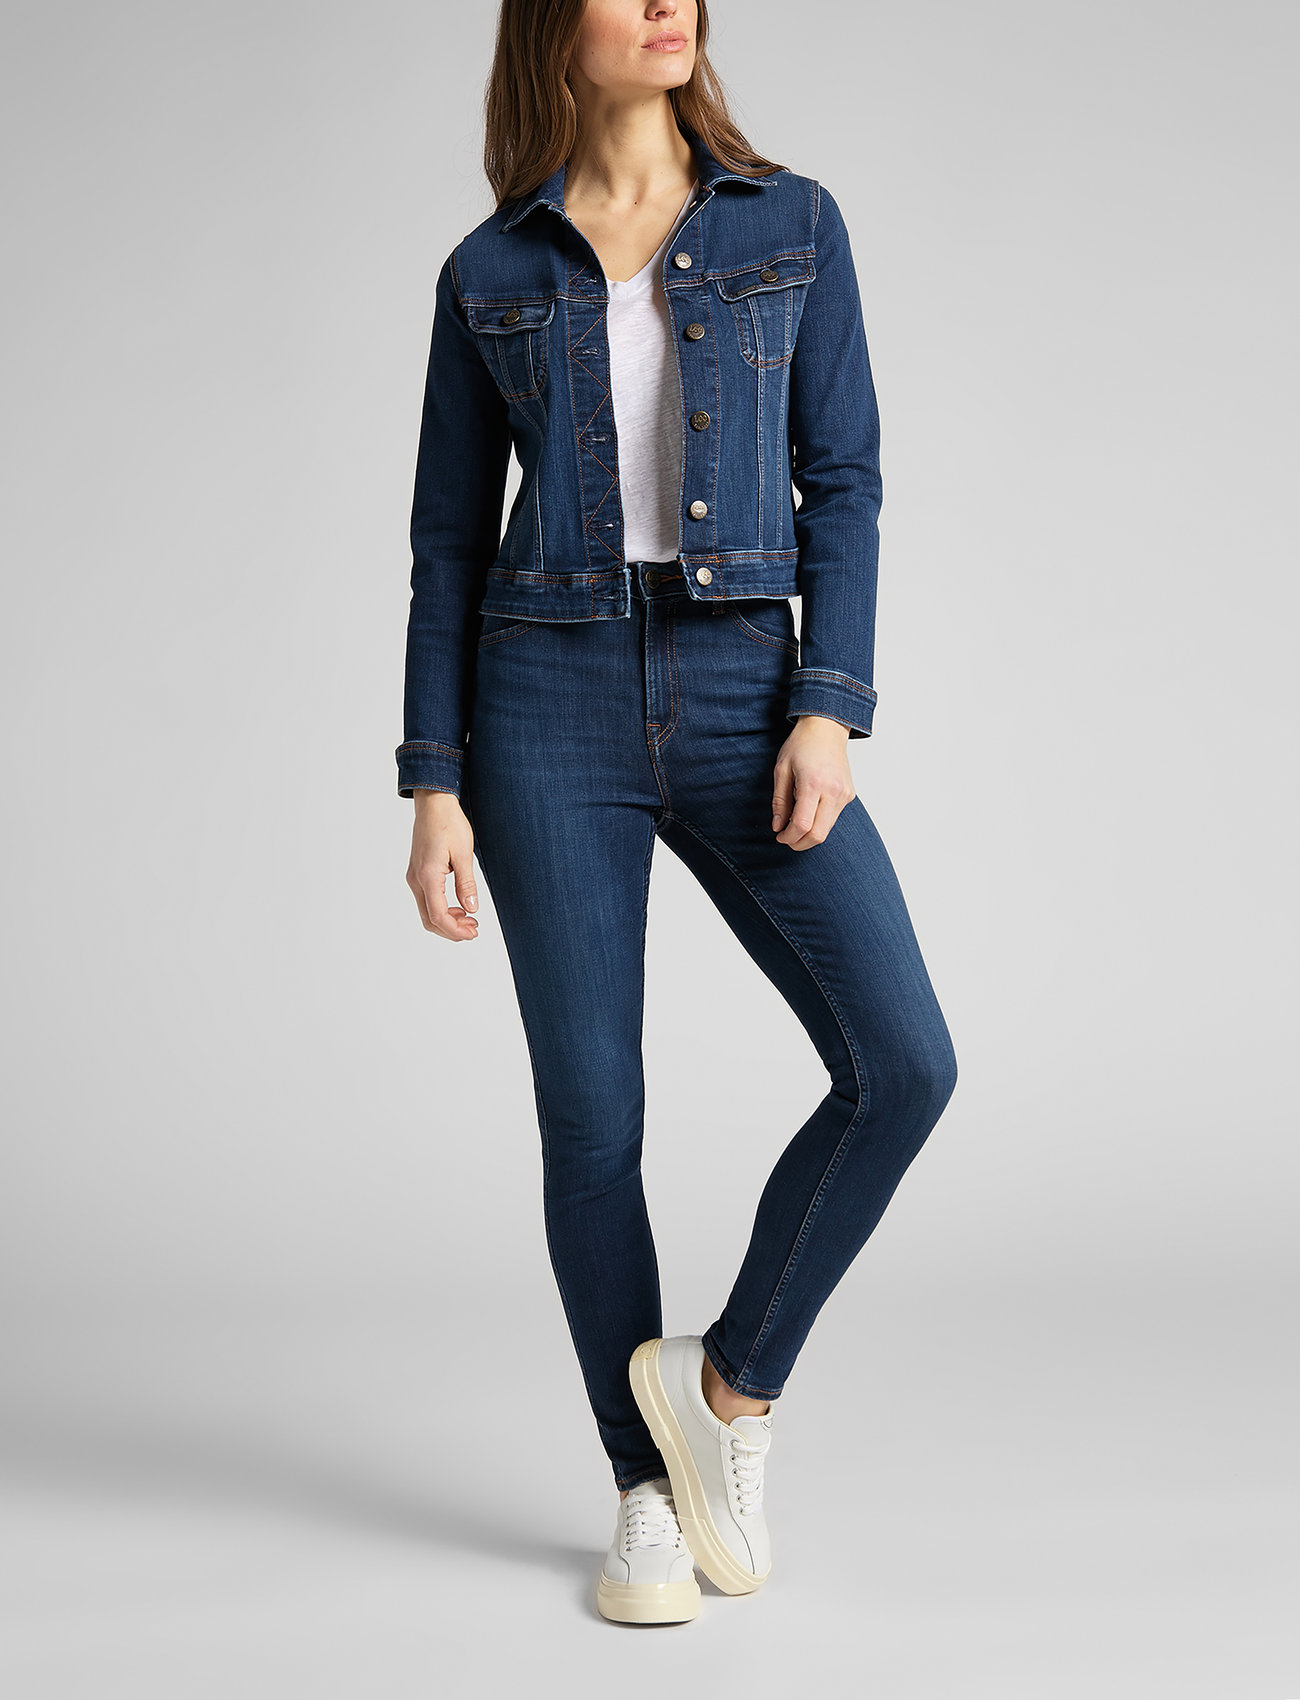 Lee Jeans Slim Rider  €. Buy Denim jackets from Lee Jeans online at  . Fast delivery and easy returns